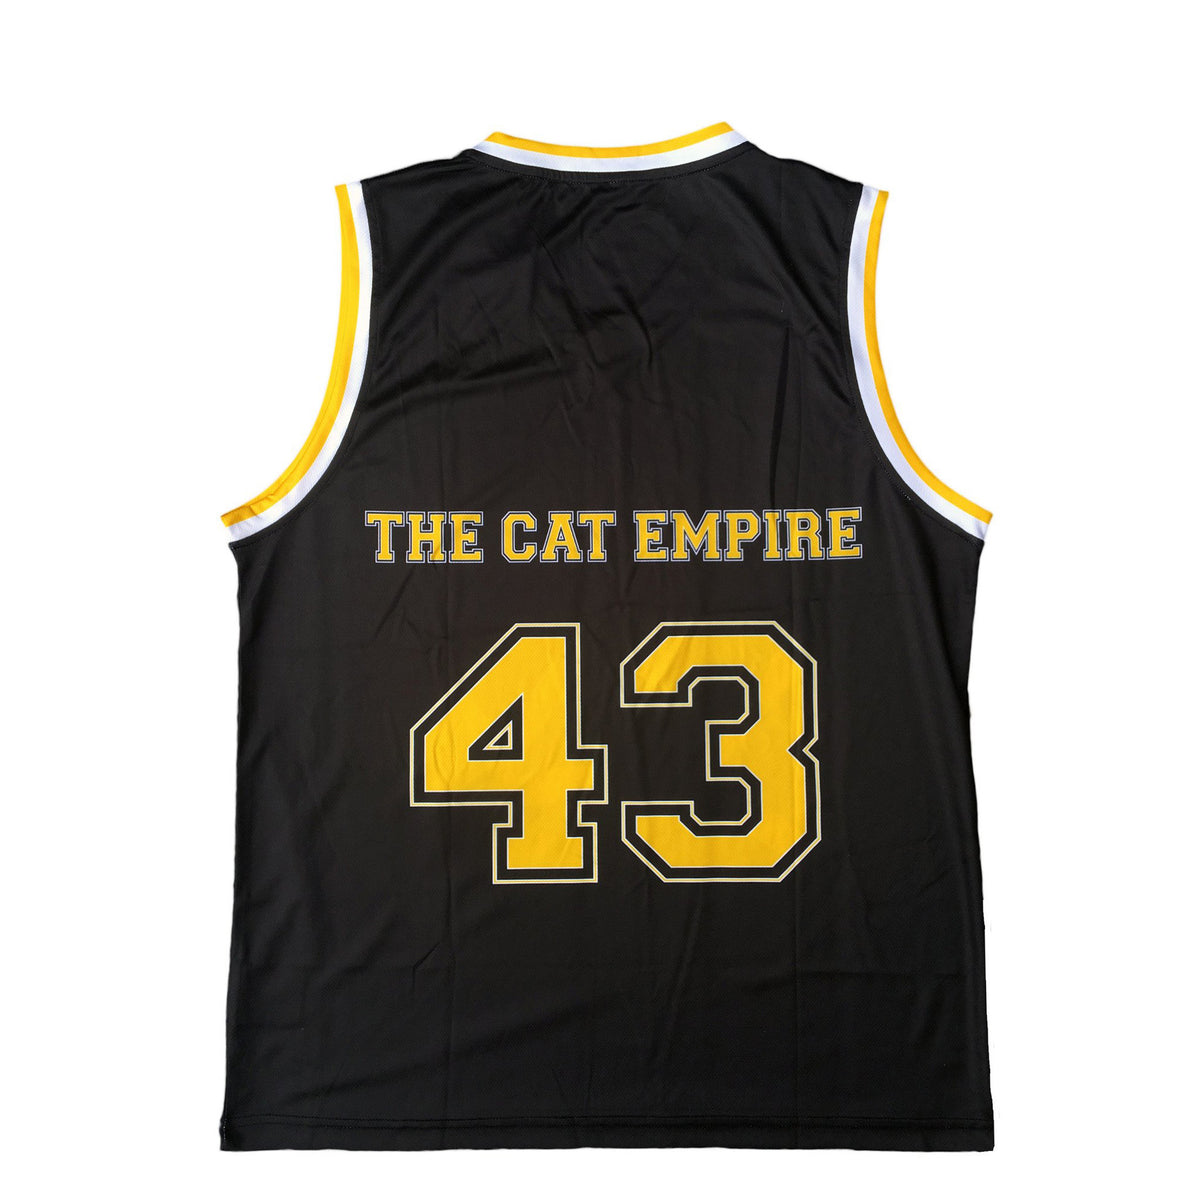 The Cat Empire - Basketball Jersey